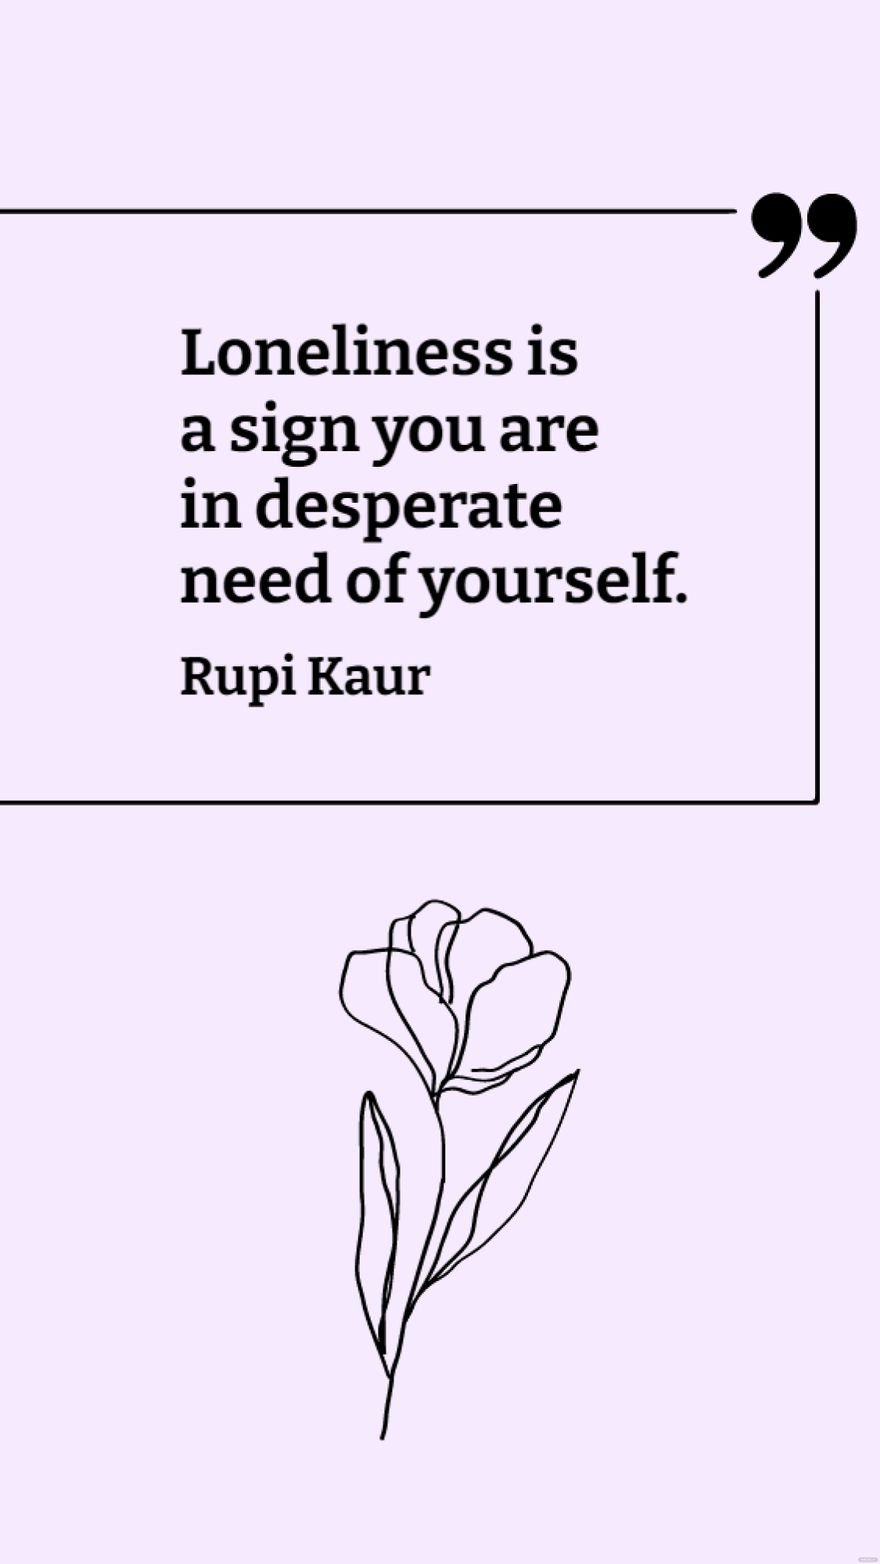 Rupi Kaur - Loneliness is a sign you are in desperate need of yourself.